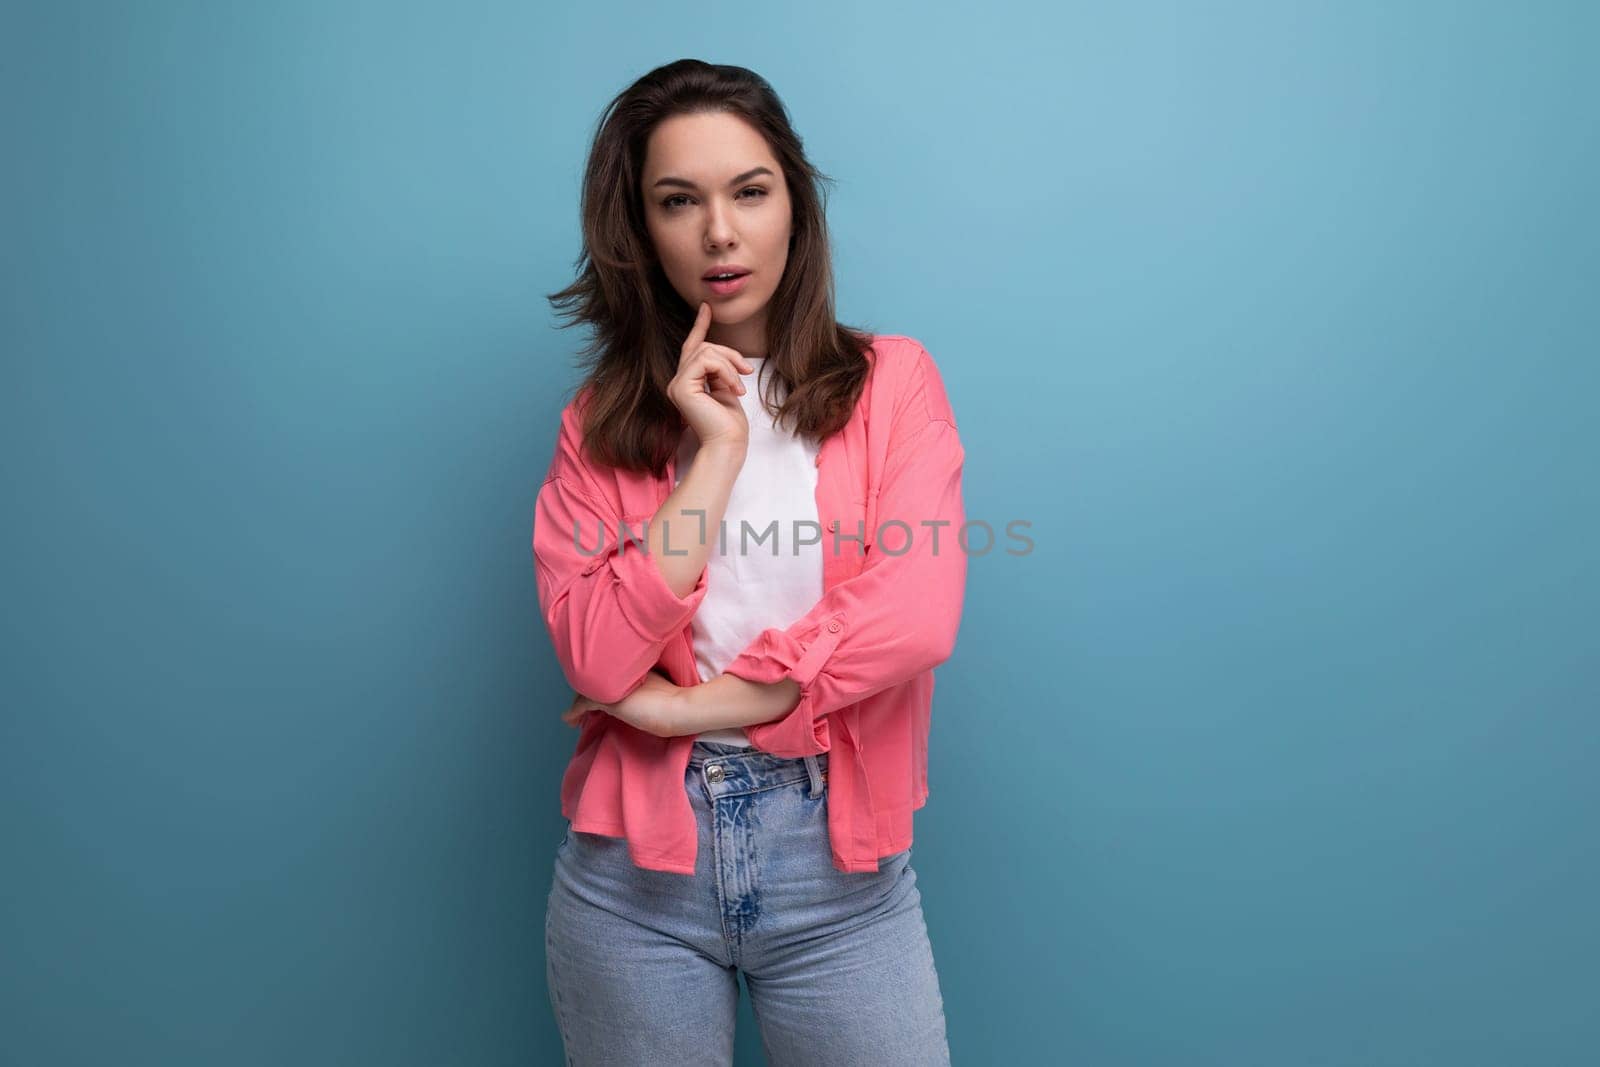 calm brunette young woman with shoulder-length hair in a pink shirt and jeans by TRMK